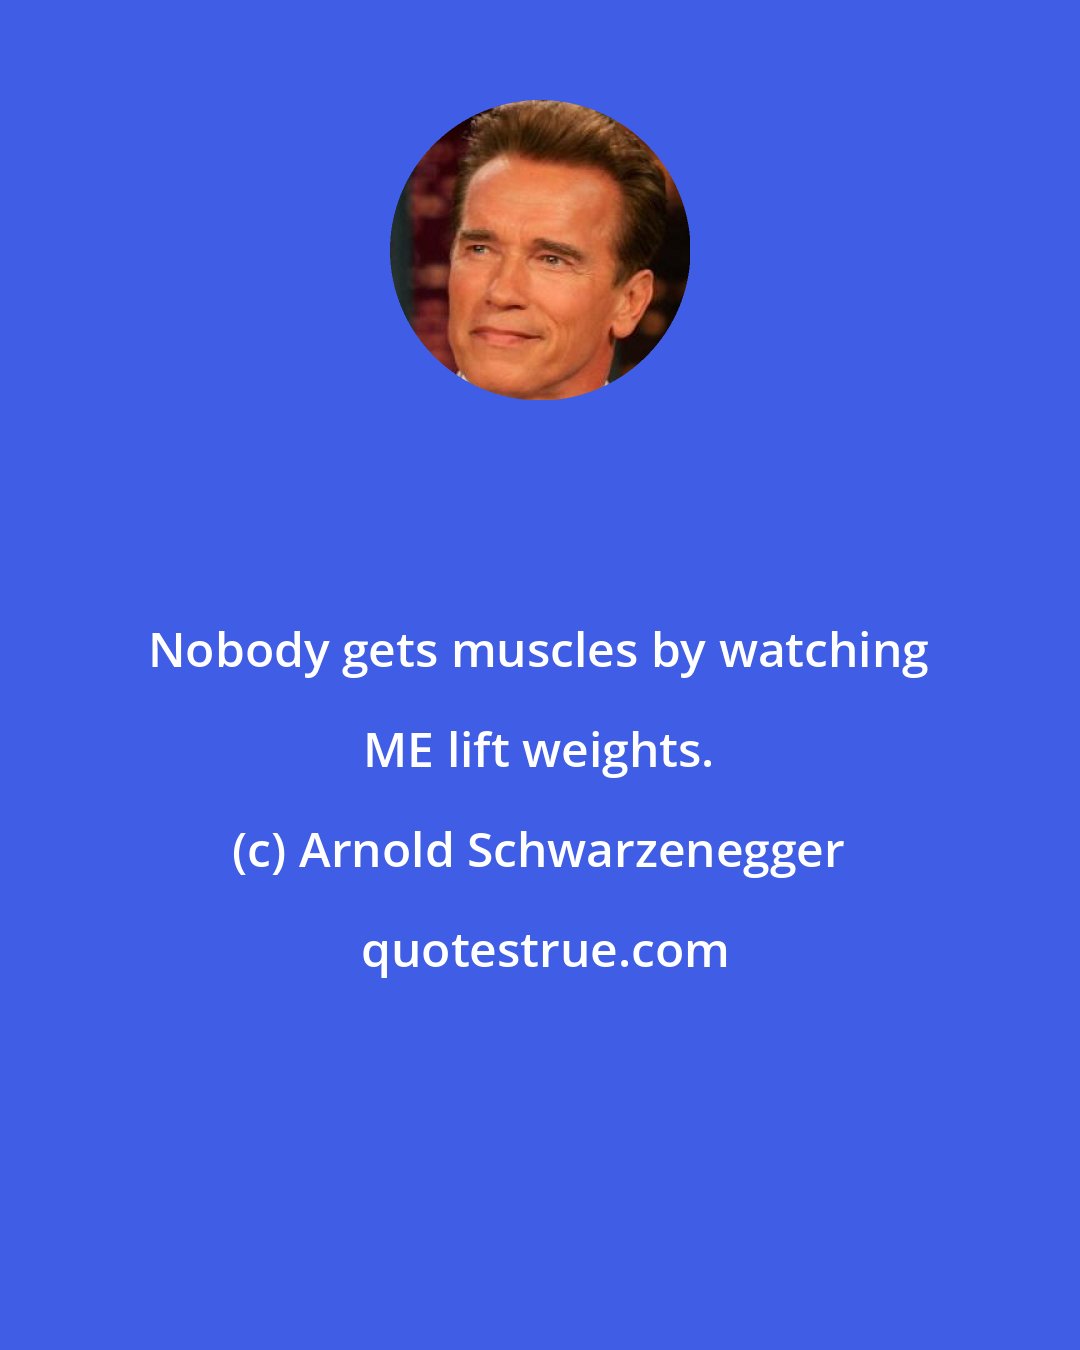 Arnold Schwarzenegger: Nobody gets muscles by watching ME lift weights.